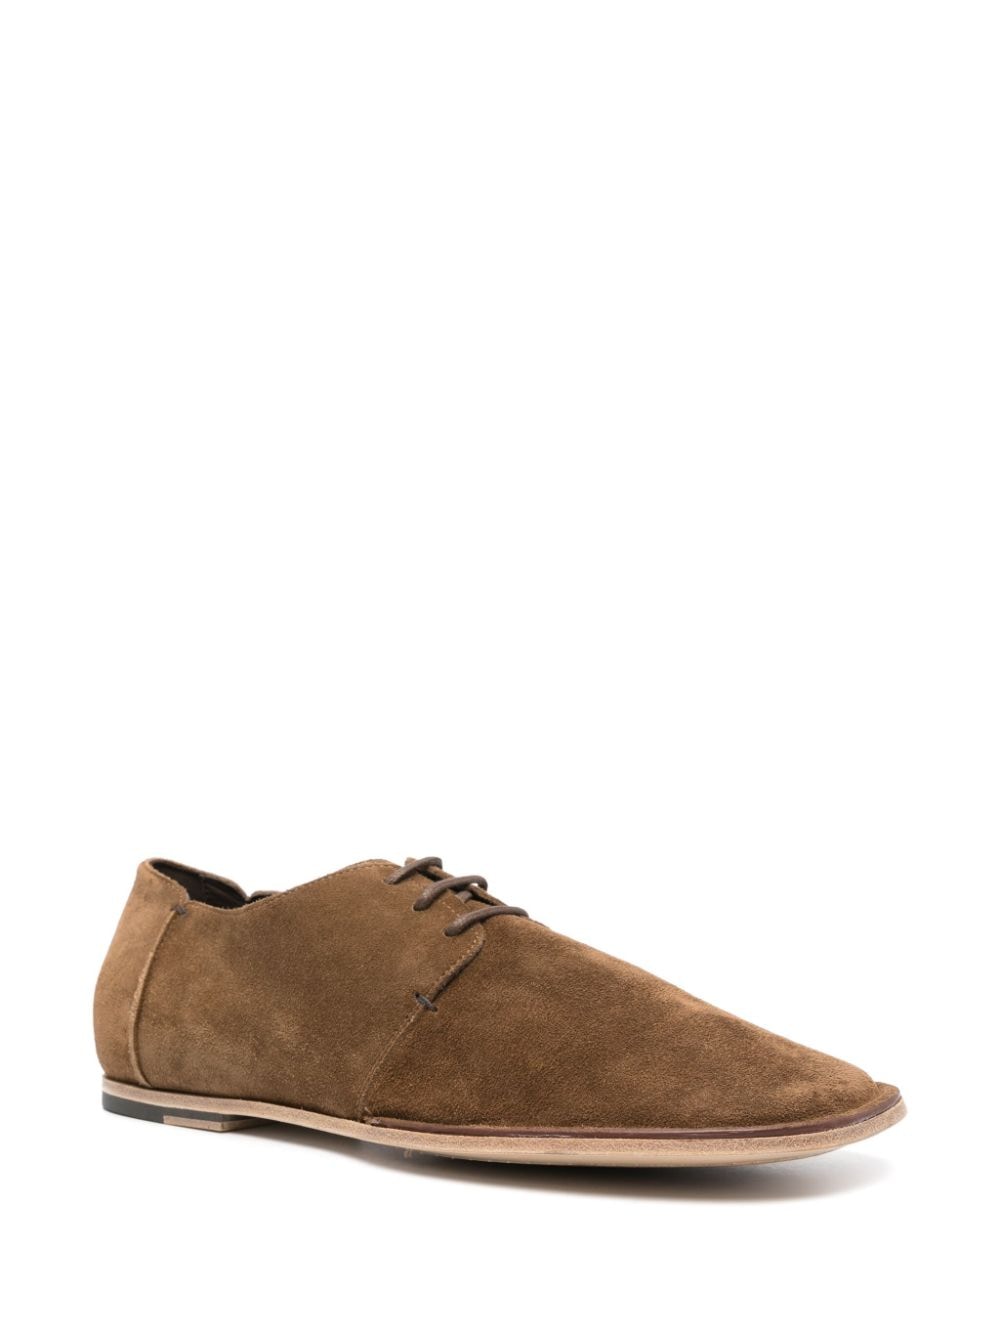 SUEDE OXFORD SHOES